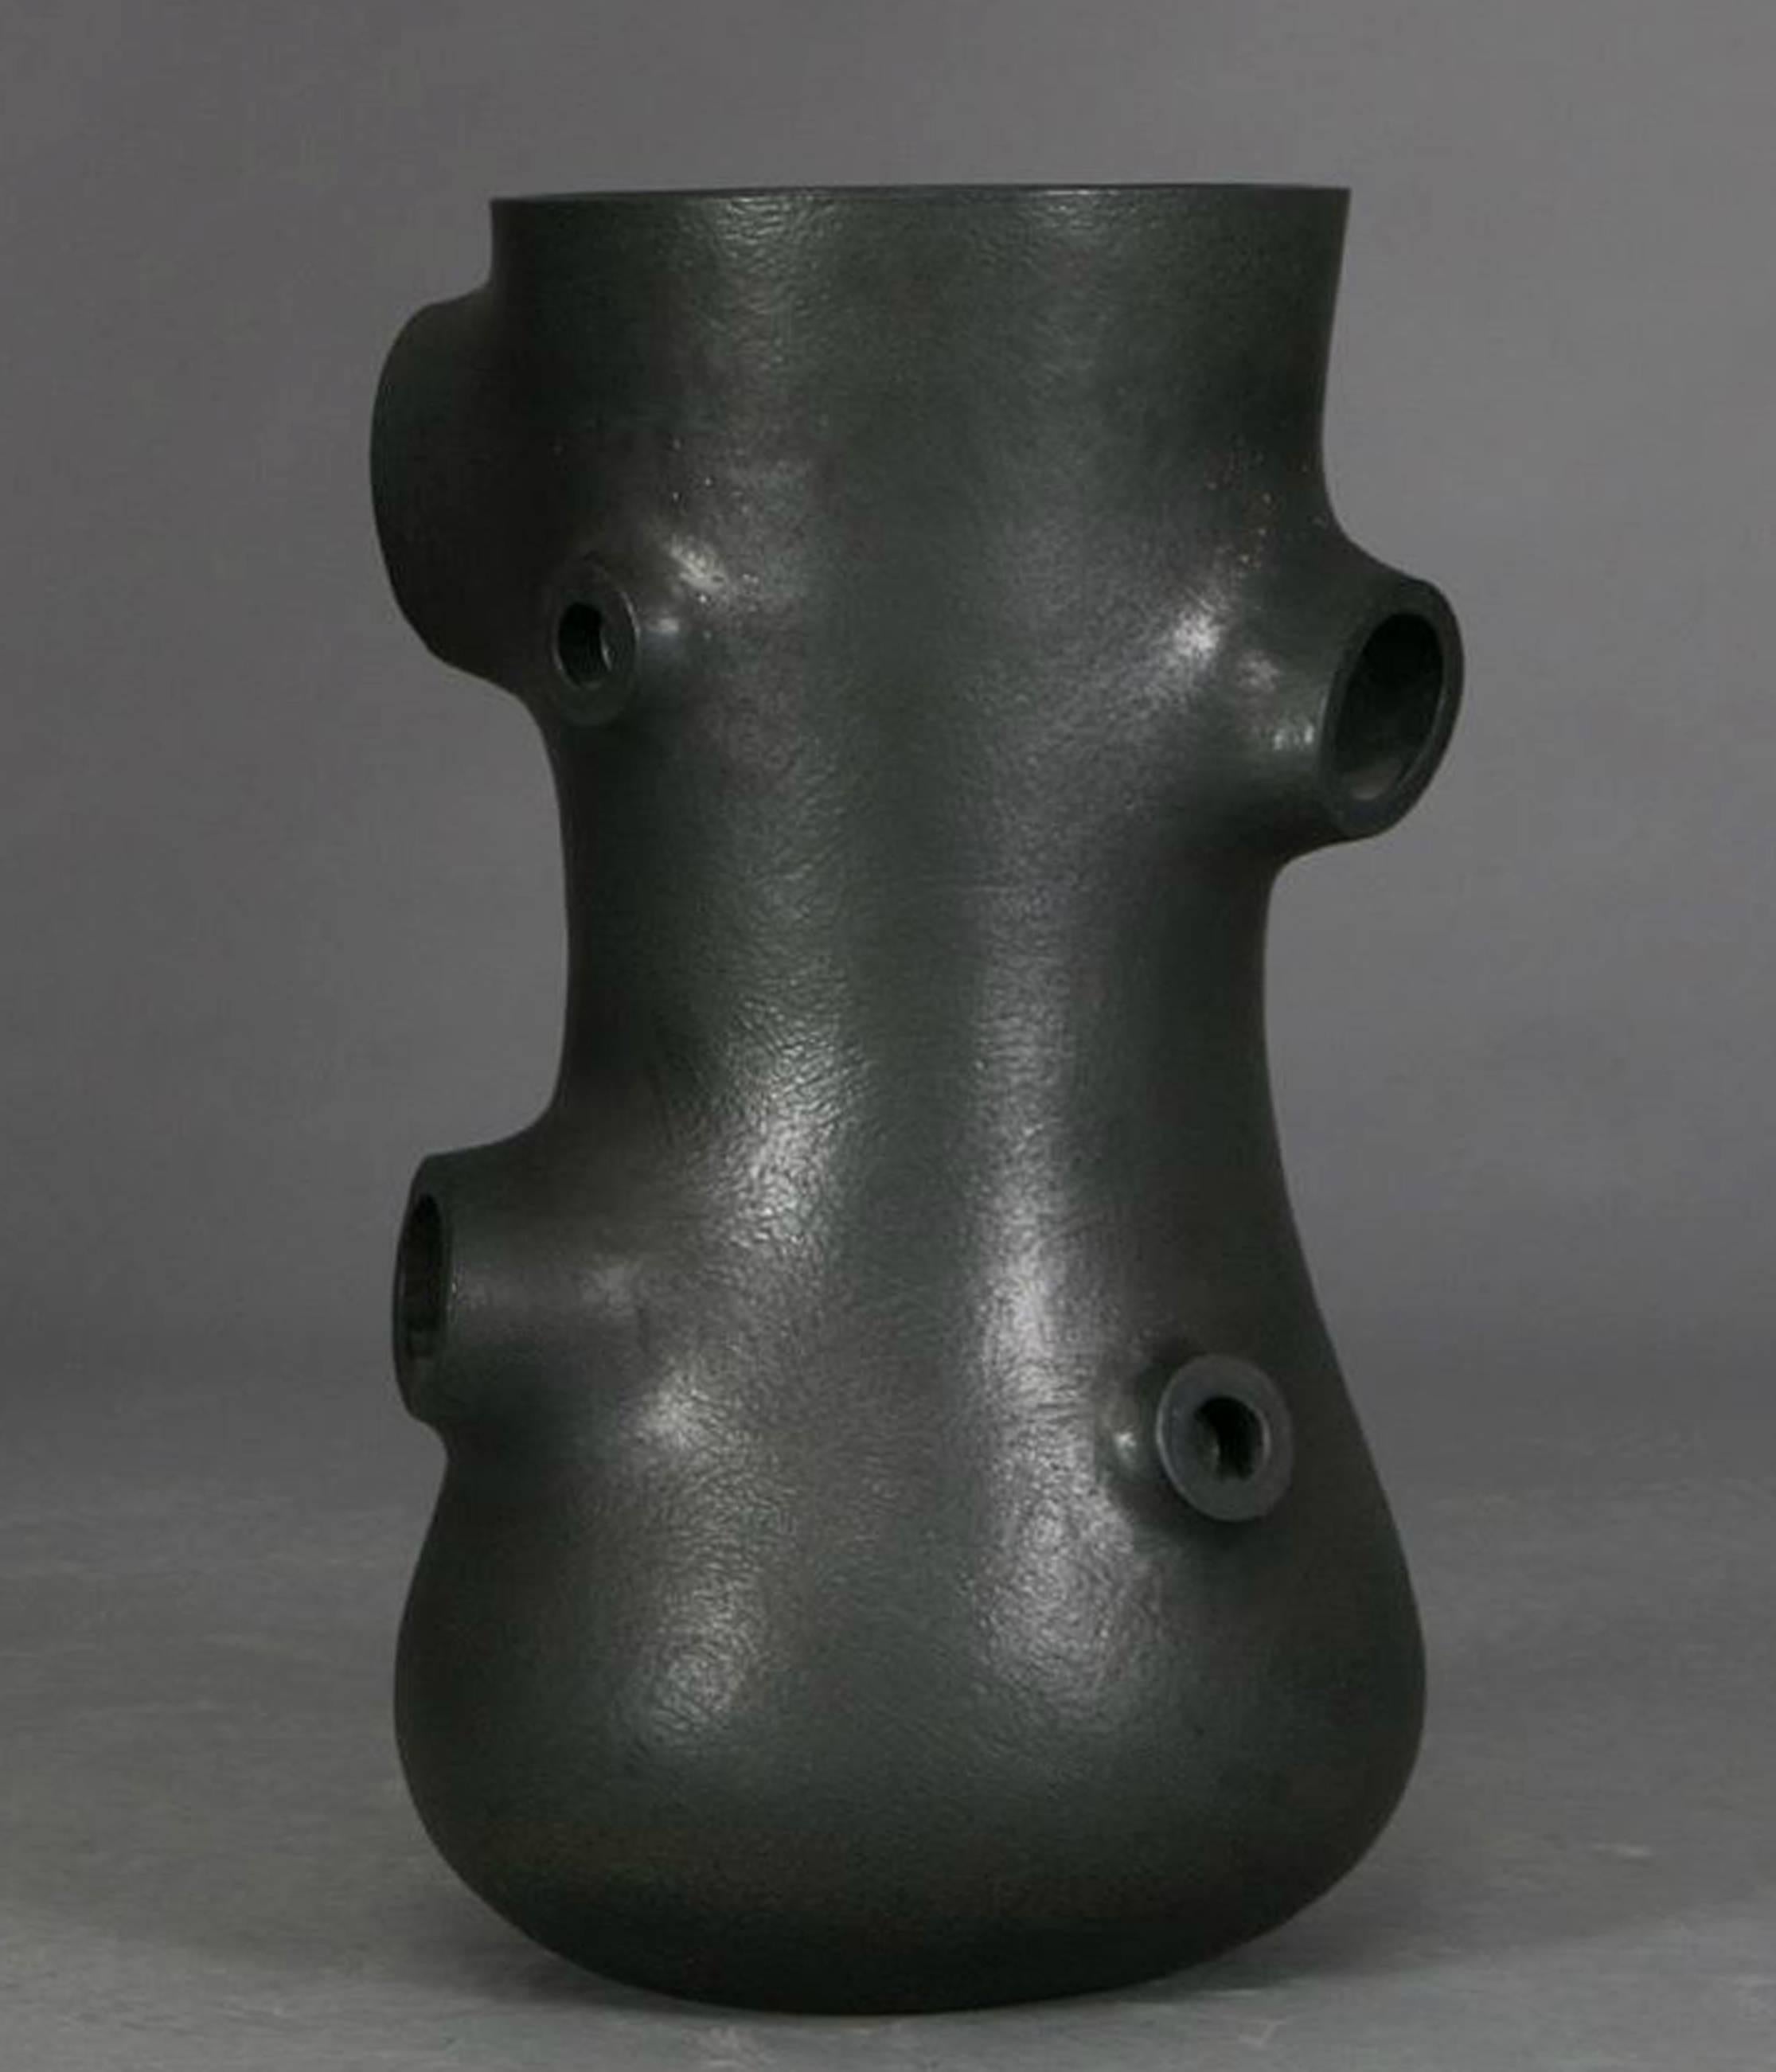 An abstract sculptural black ceramic vessel by Martin Bodilsen Kaldahl: Signed MBJ 03. Martin Bodilsen Kaldahl Born 1954 in Denmark. Education: Royal College of Art, London. MA RCA Ceramics and Glass, 1988 - 1990: Collections,
Victoria & Albert